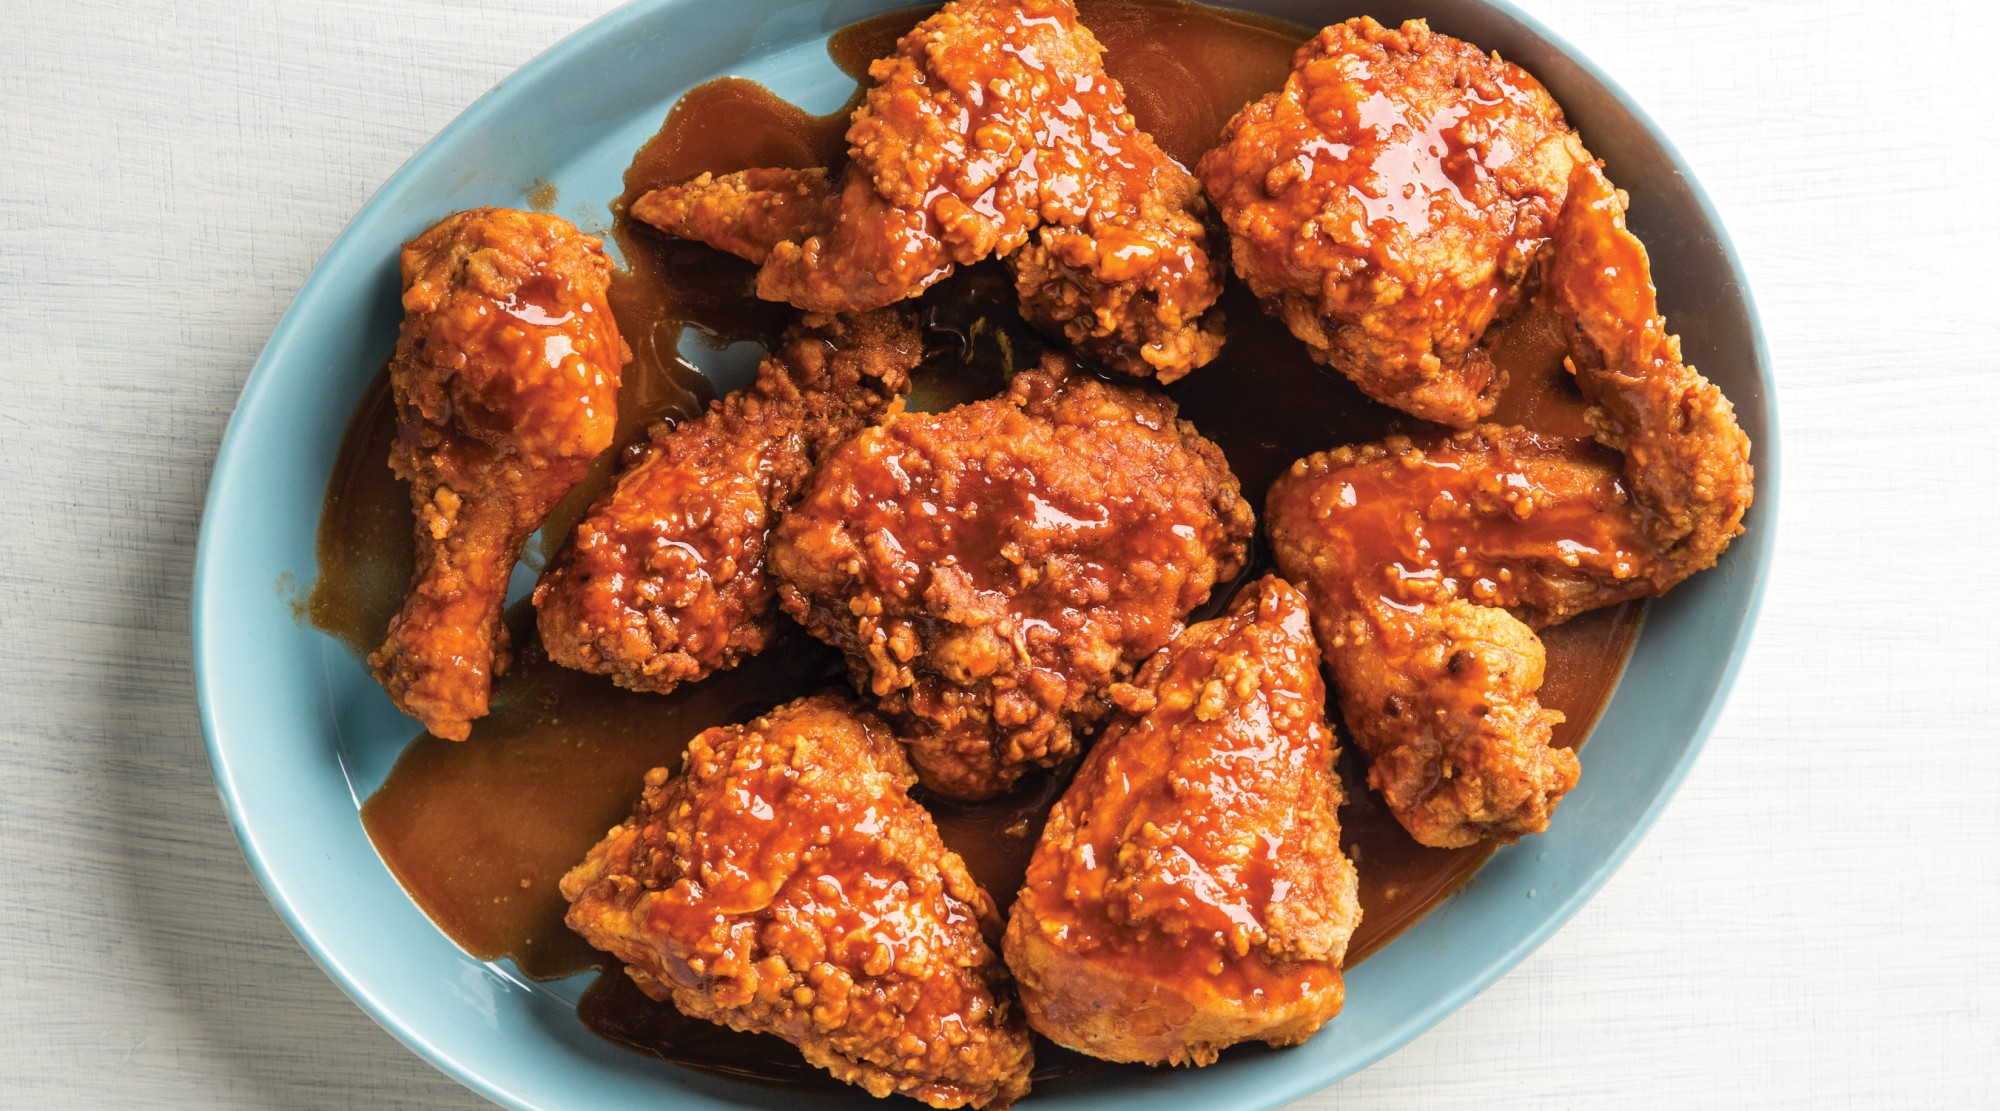 North Carolina Dipped Fried Chicken | The Splendid Table